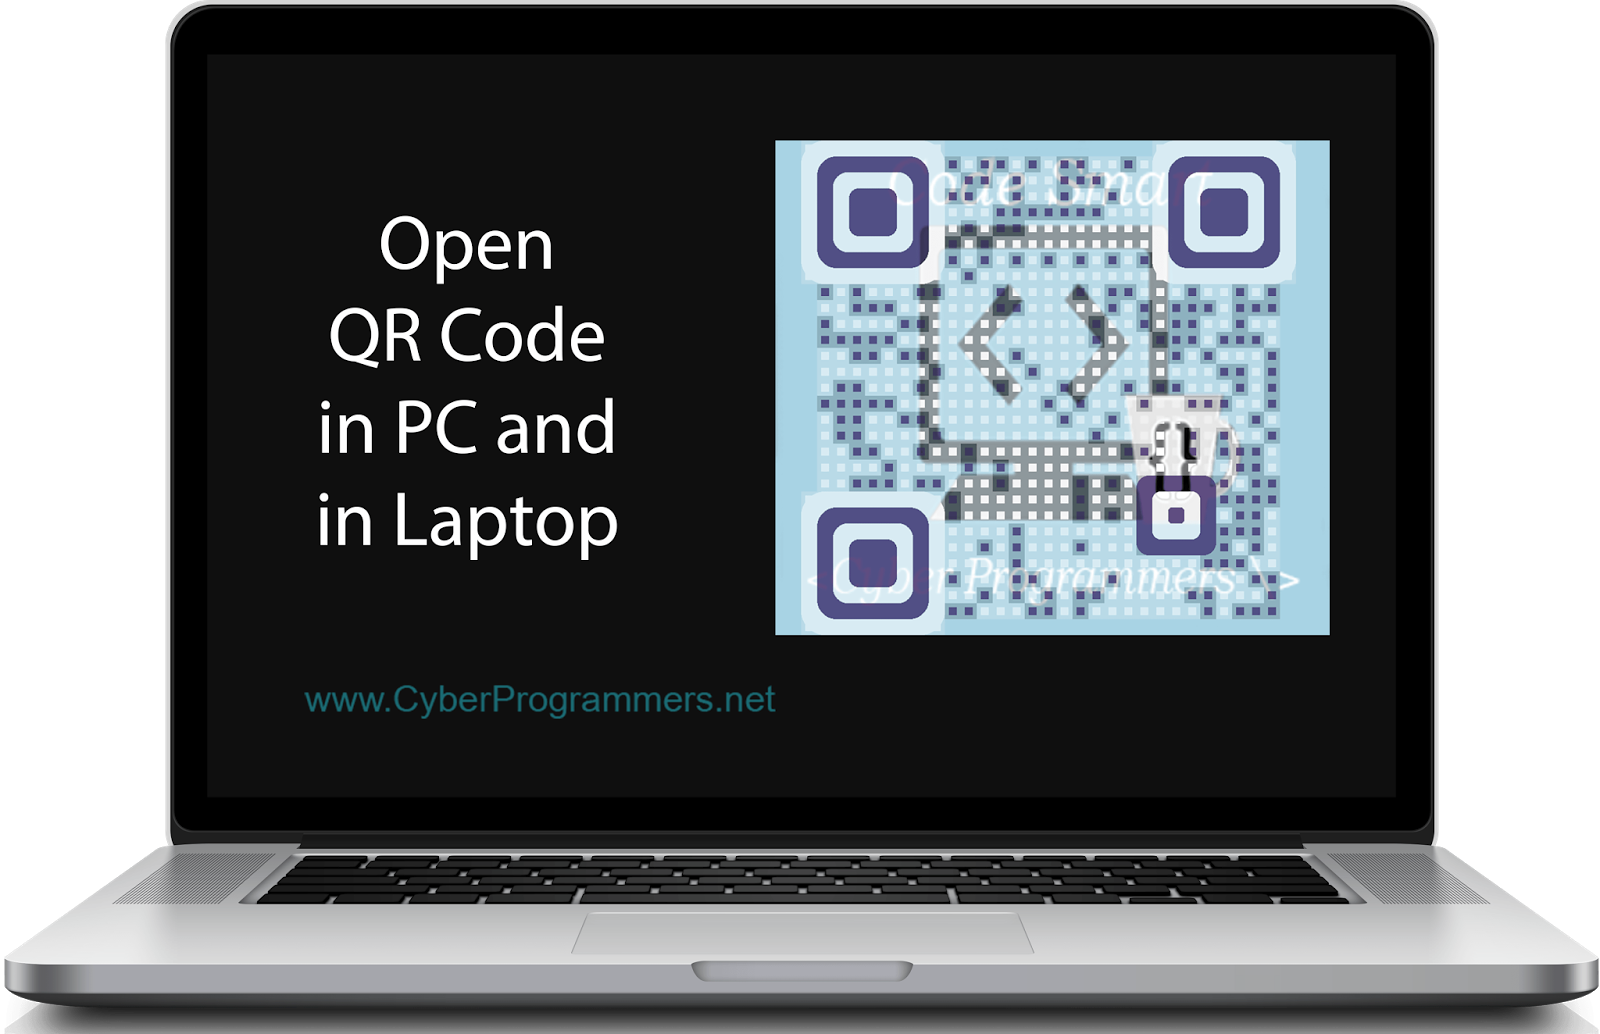 How to Scan/Read and Open QR codes in PC and Laptop - Cyber Programmers